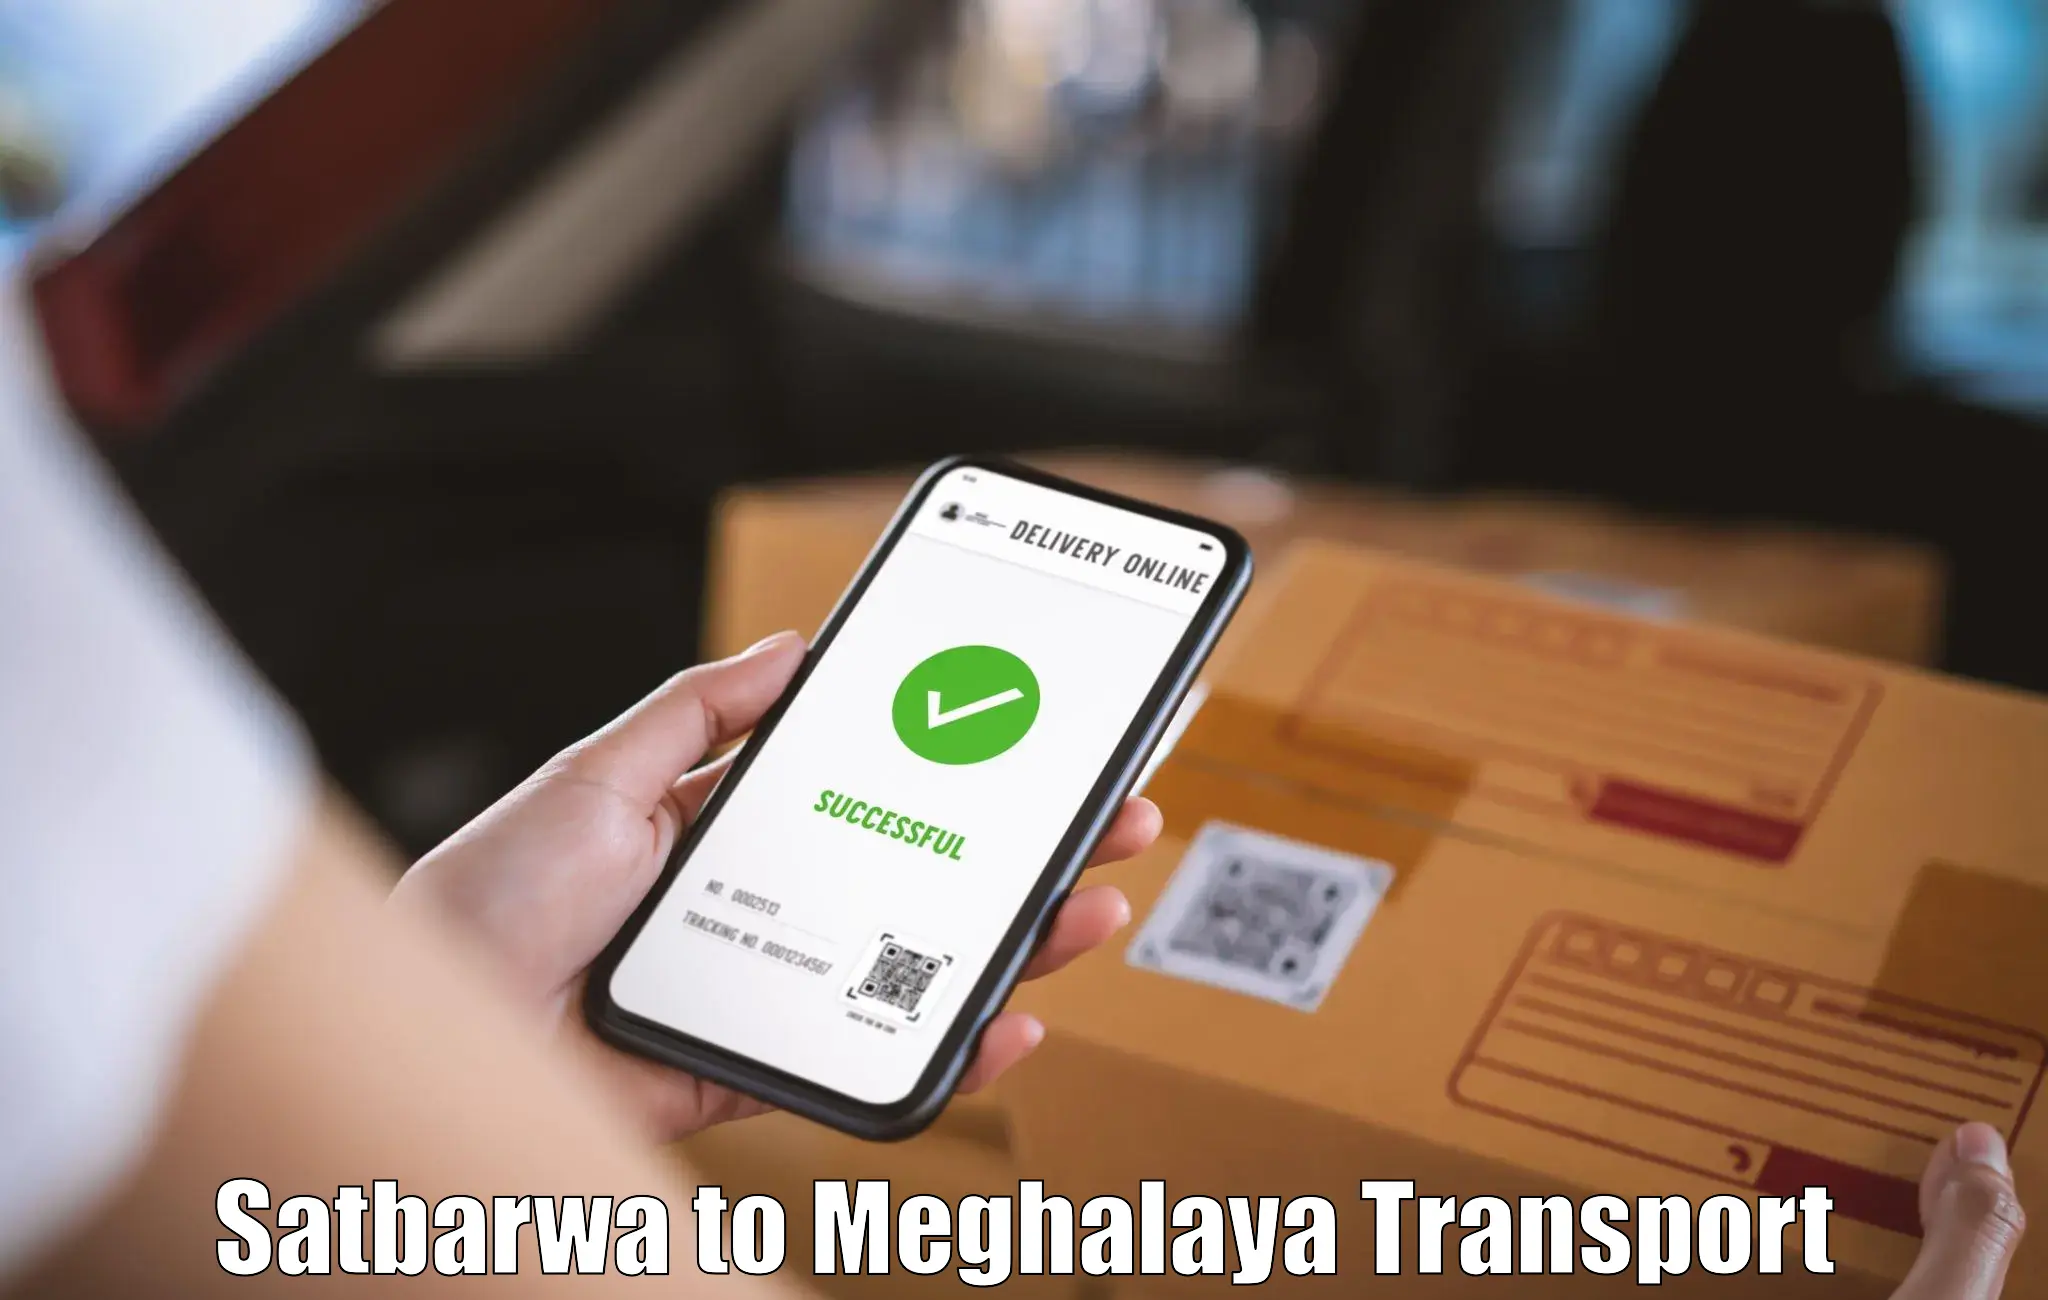 Goods delivery service Satbarwa to Dkhiah West